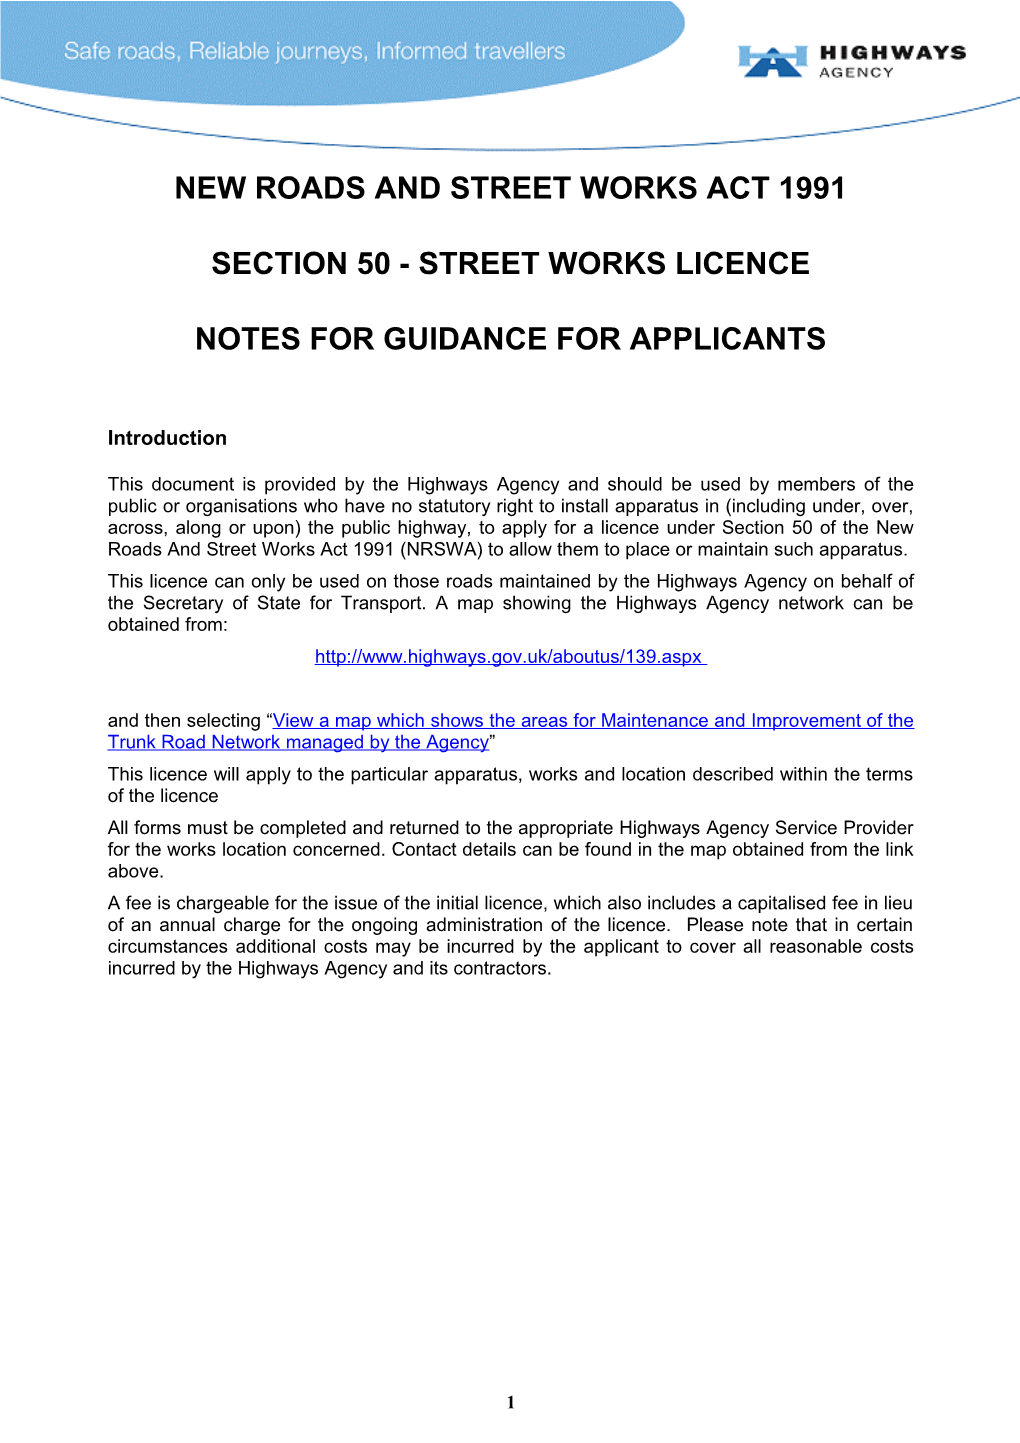 Section 50 - Street Works Licence